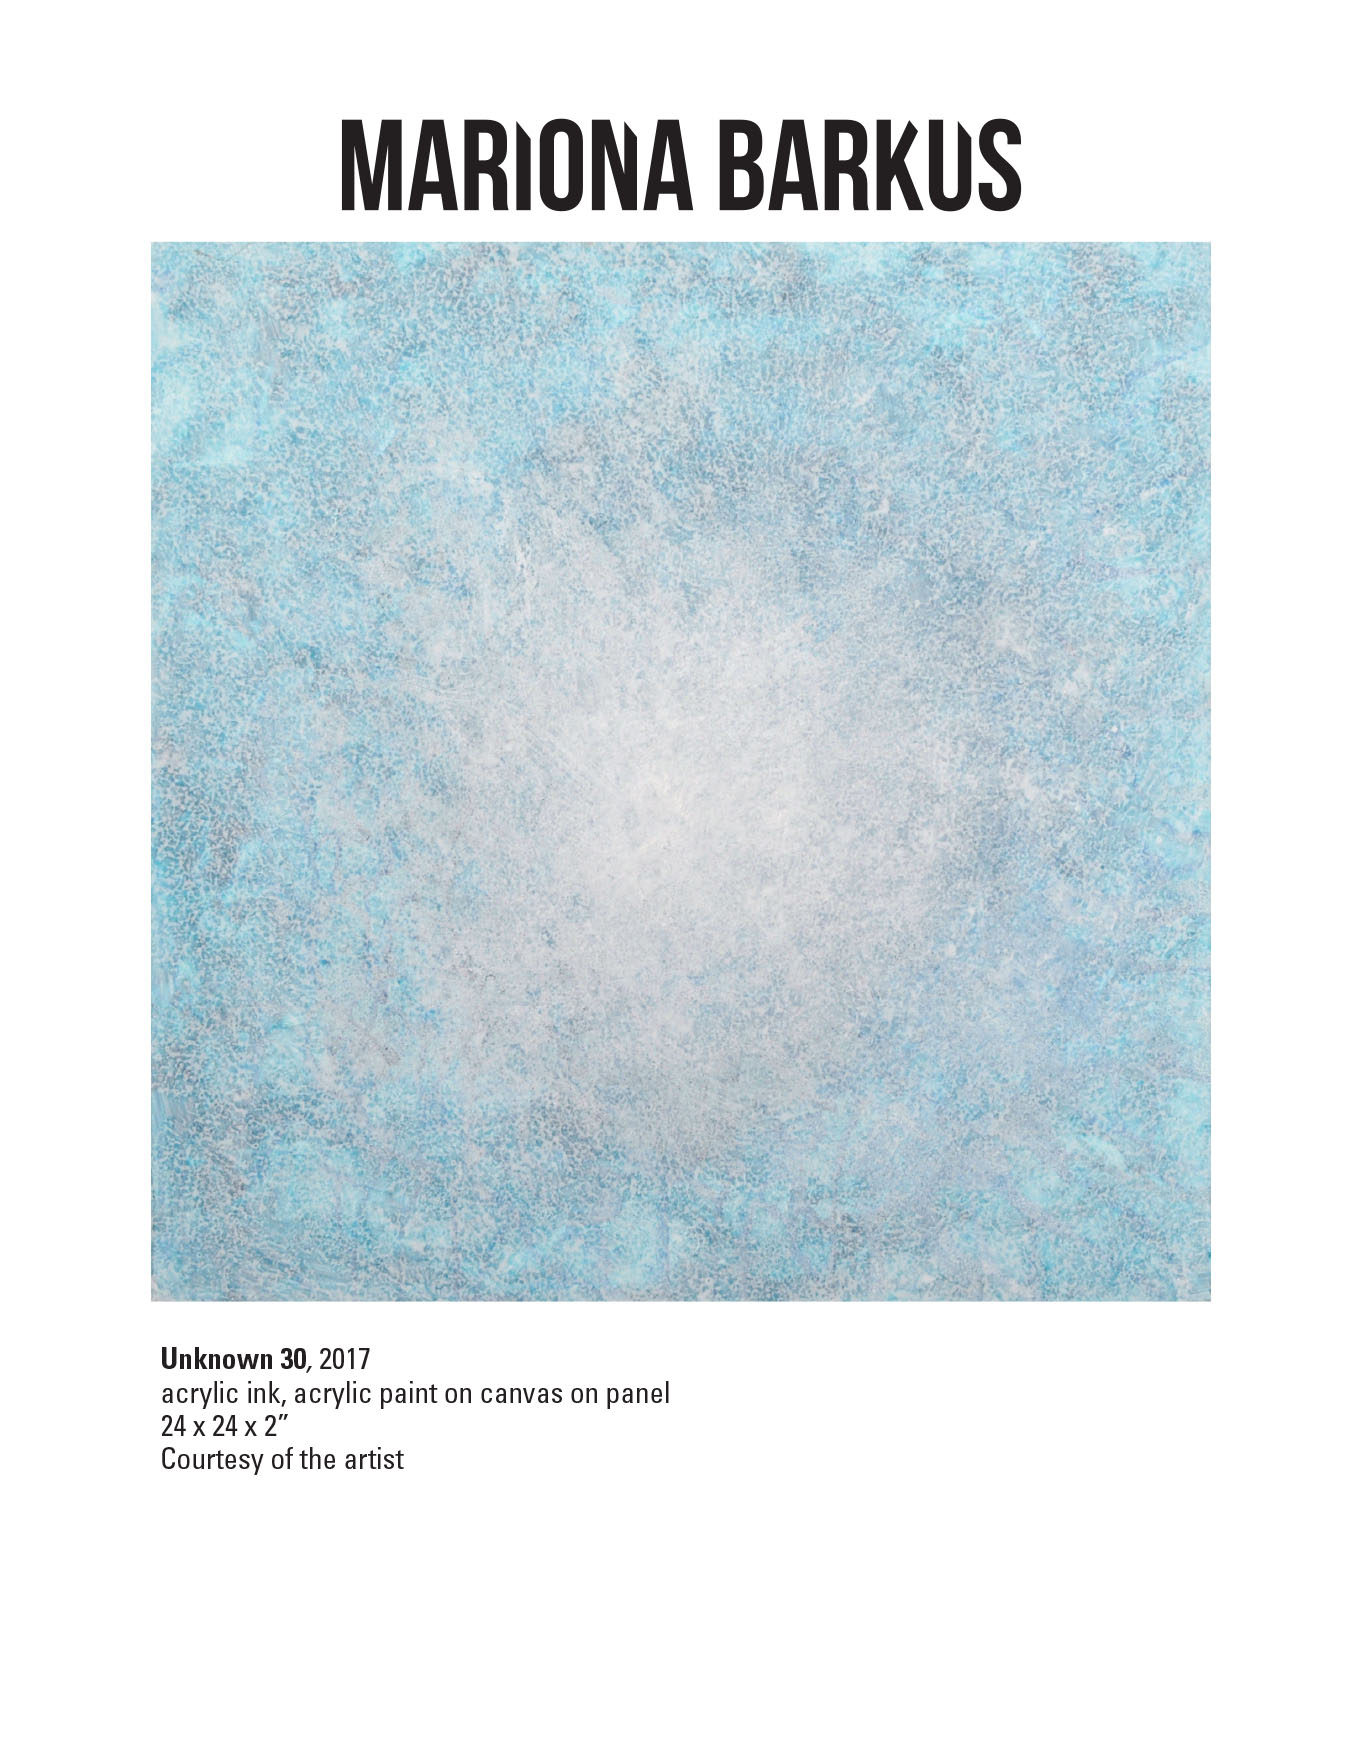 Mariona Barkus, Unknown 30, 2017. Acrylic ink, acrylic paint on canvas on panel. 24 x 24 x 2” Courtesy of the artist. An acrylic ink and paint artwork of a light blue texture with the center lighter in color.